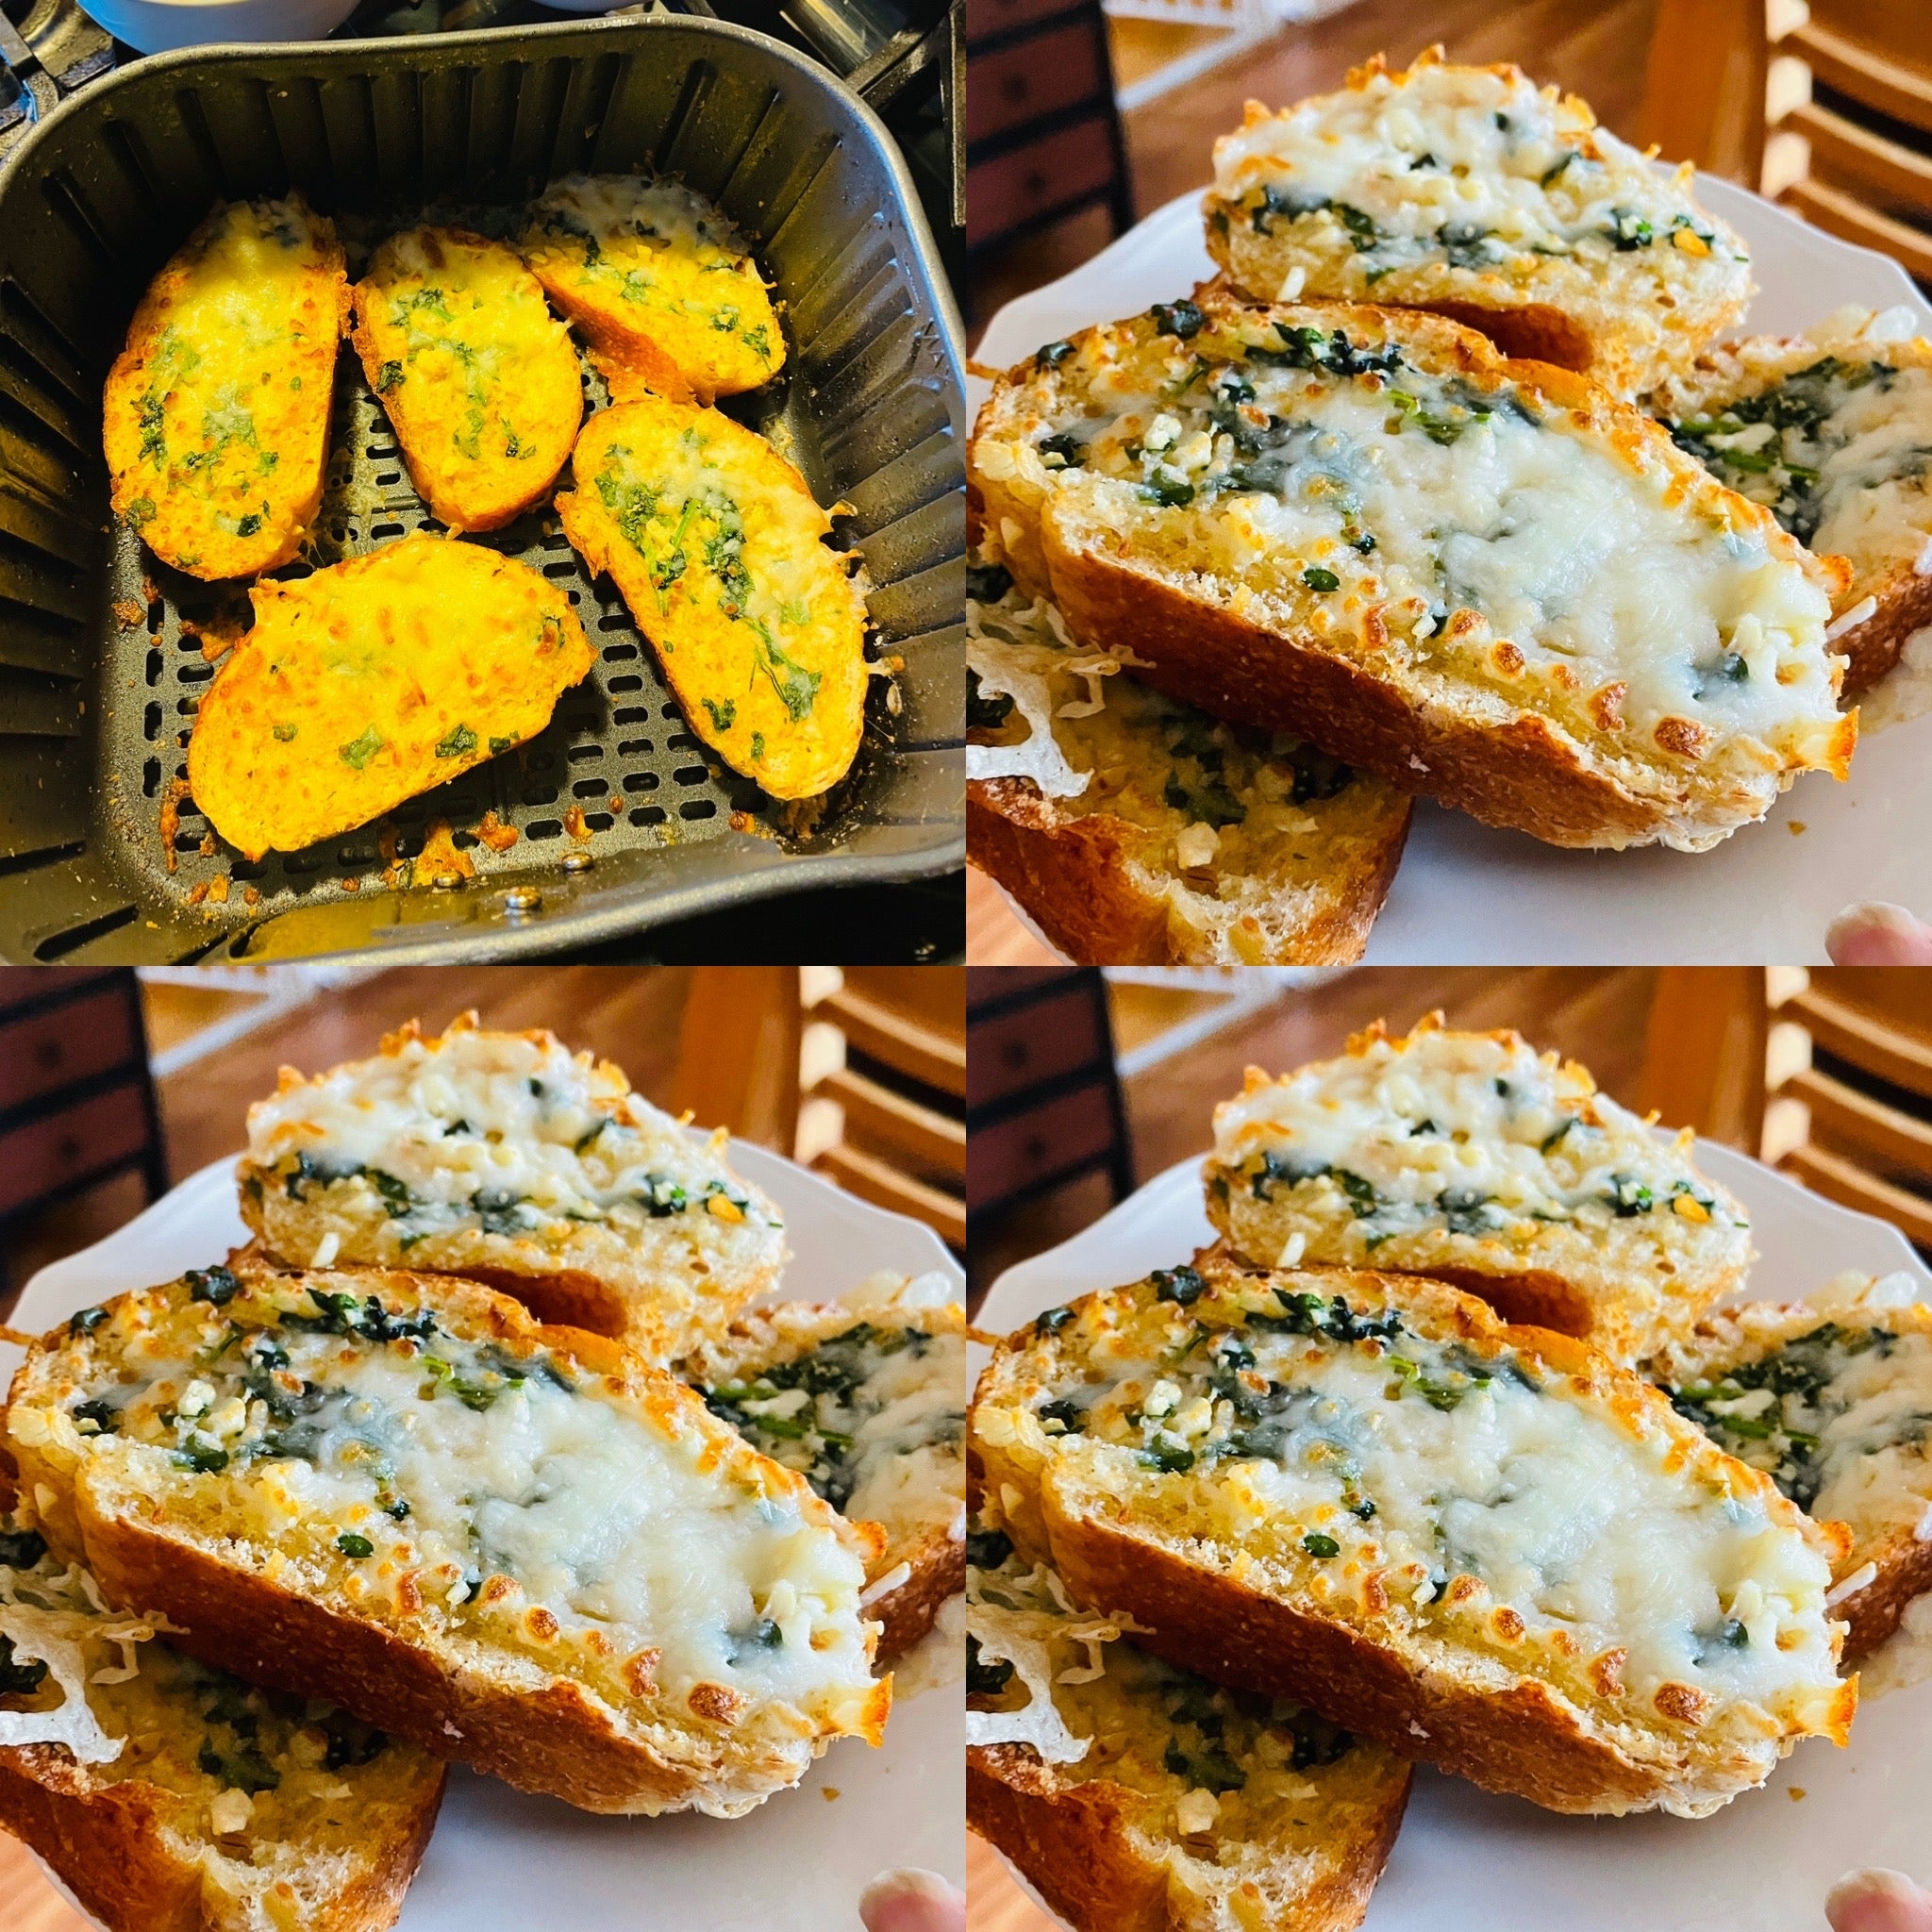 Different stages of the garlic bread being prepared with cheese